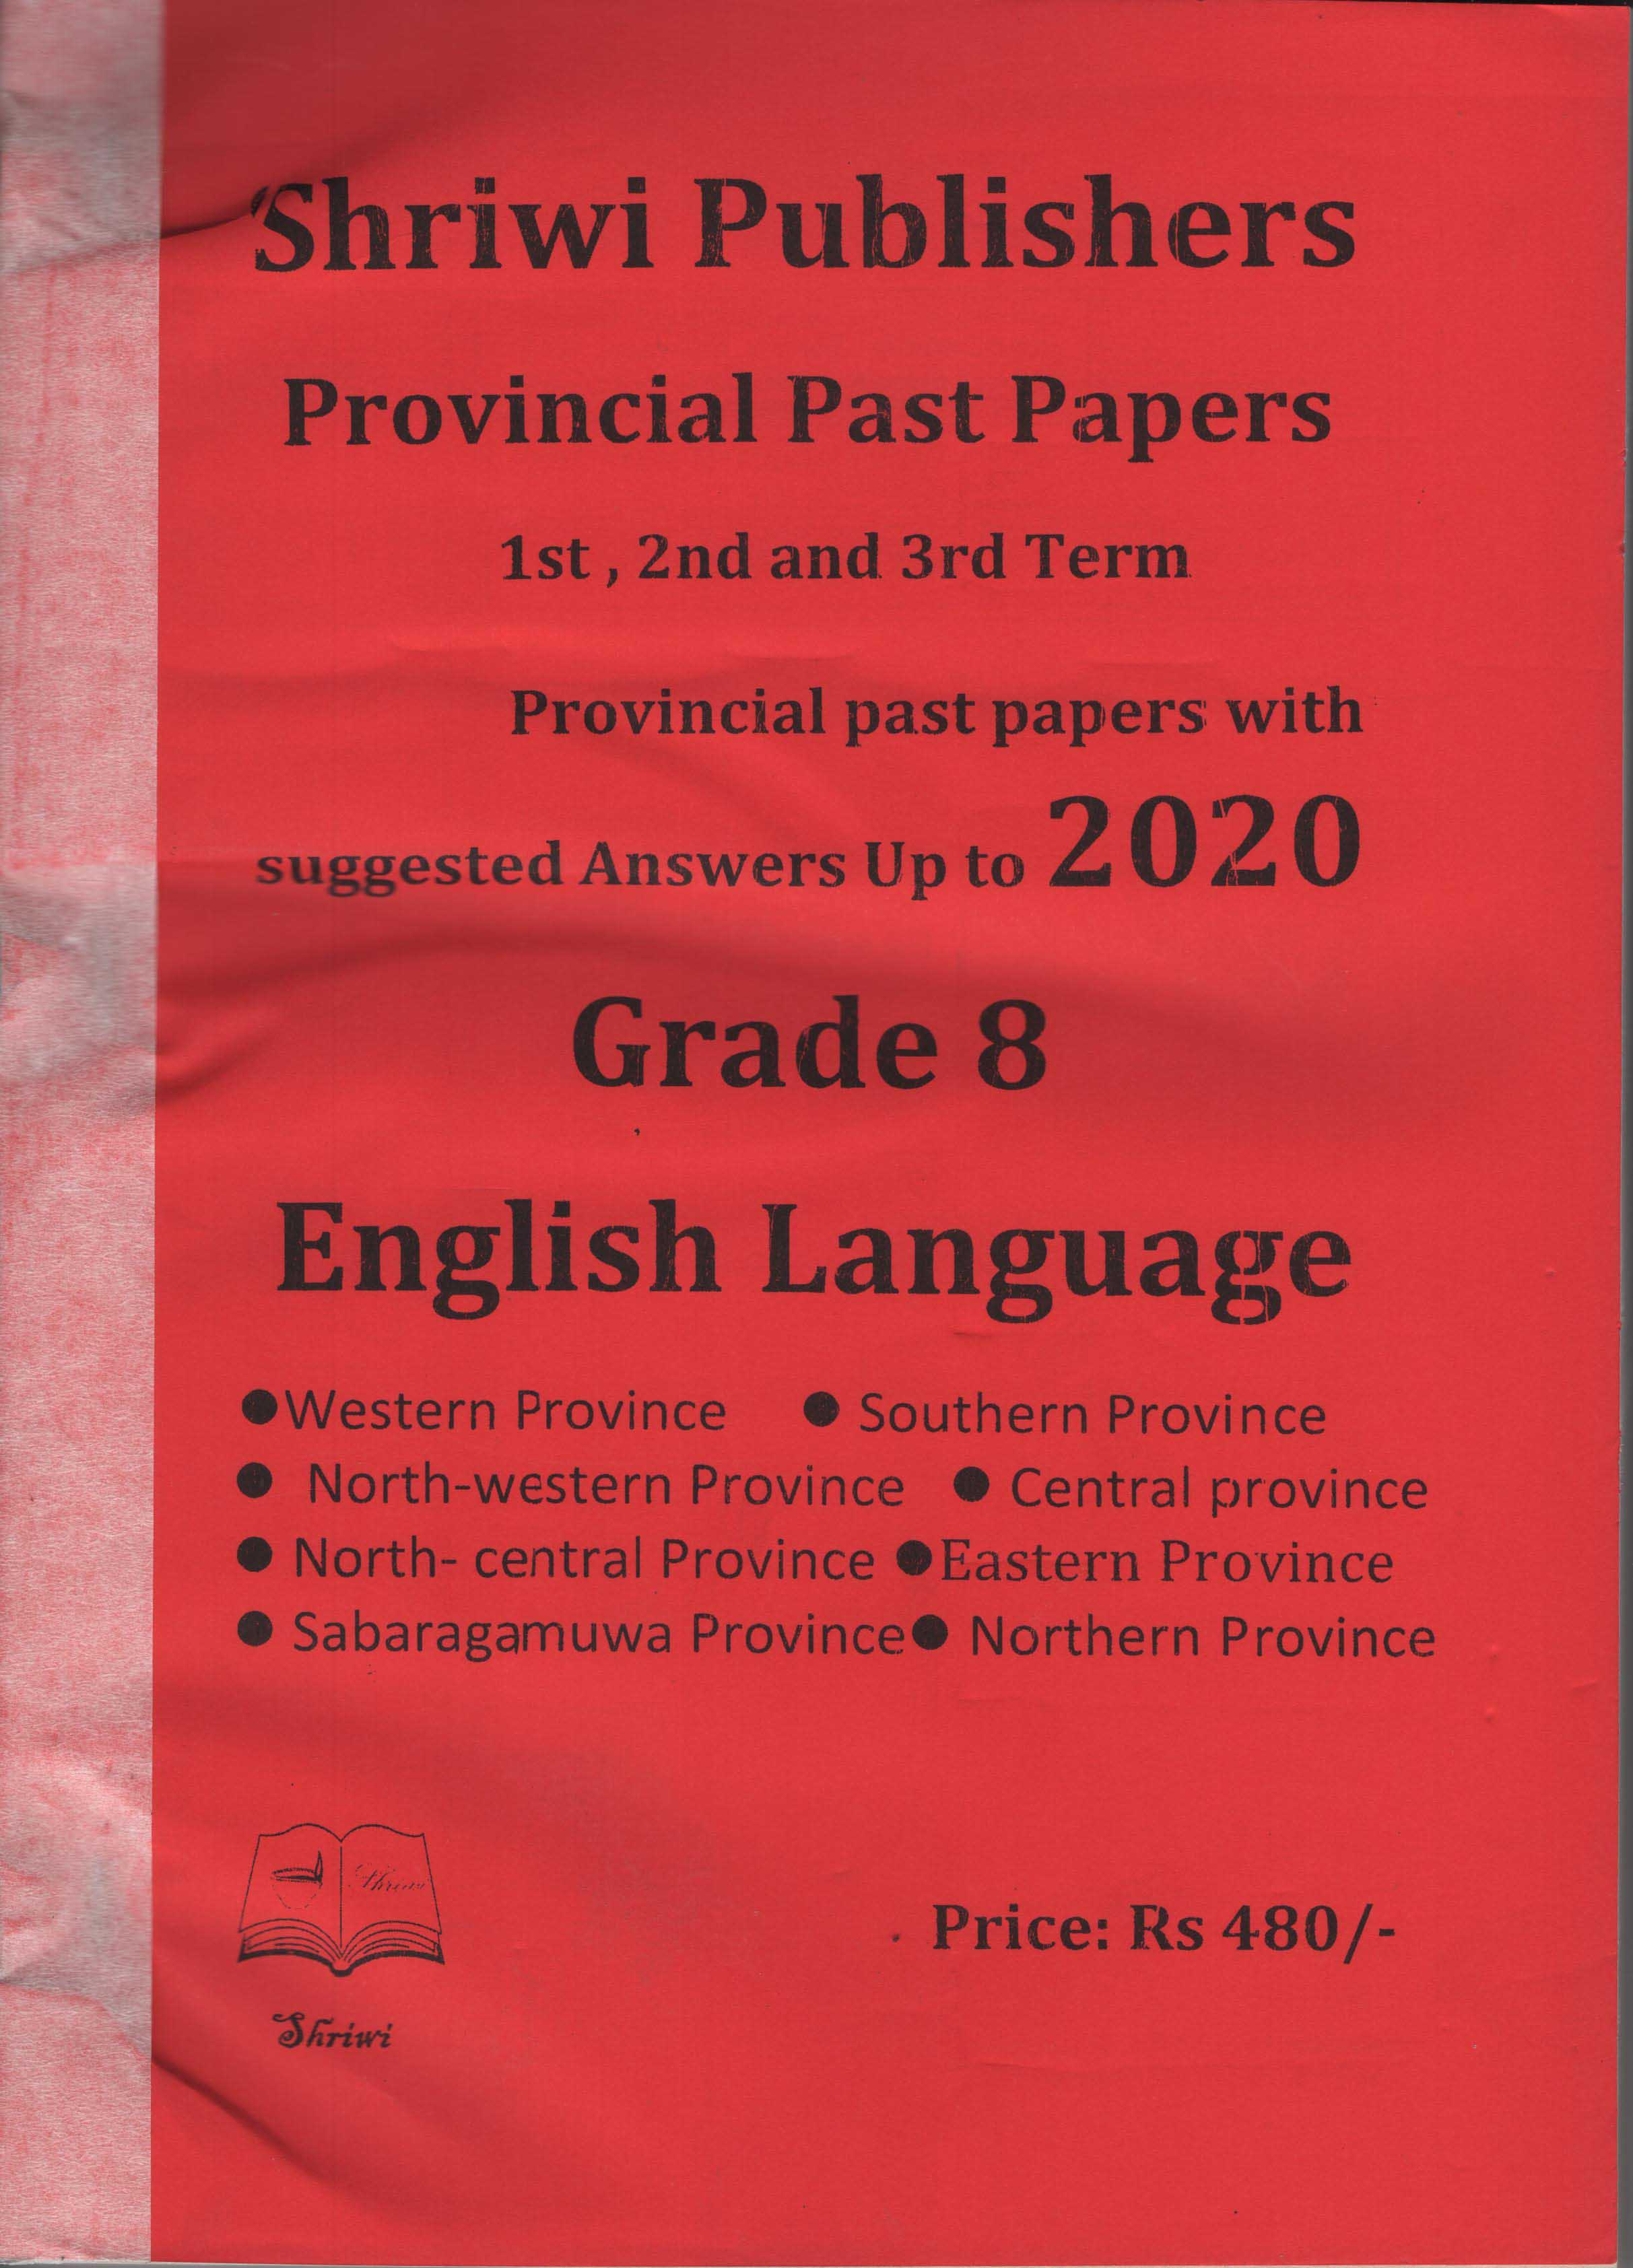 Shriwi Grade 8 English Language Provincial Past Papers upto2020 with Suggested Answers (Terms 1,2&3)